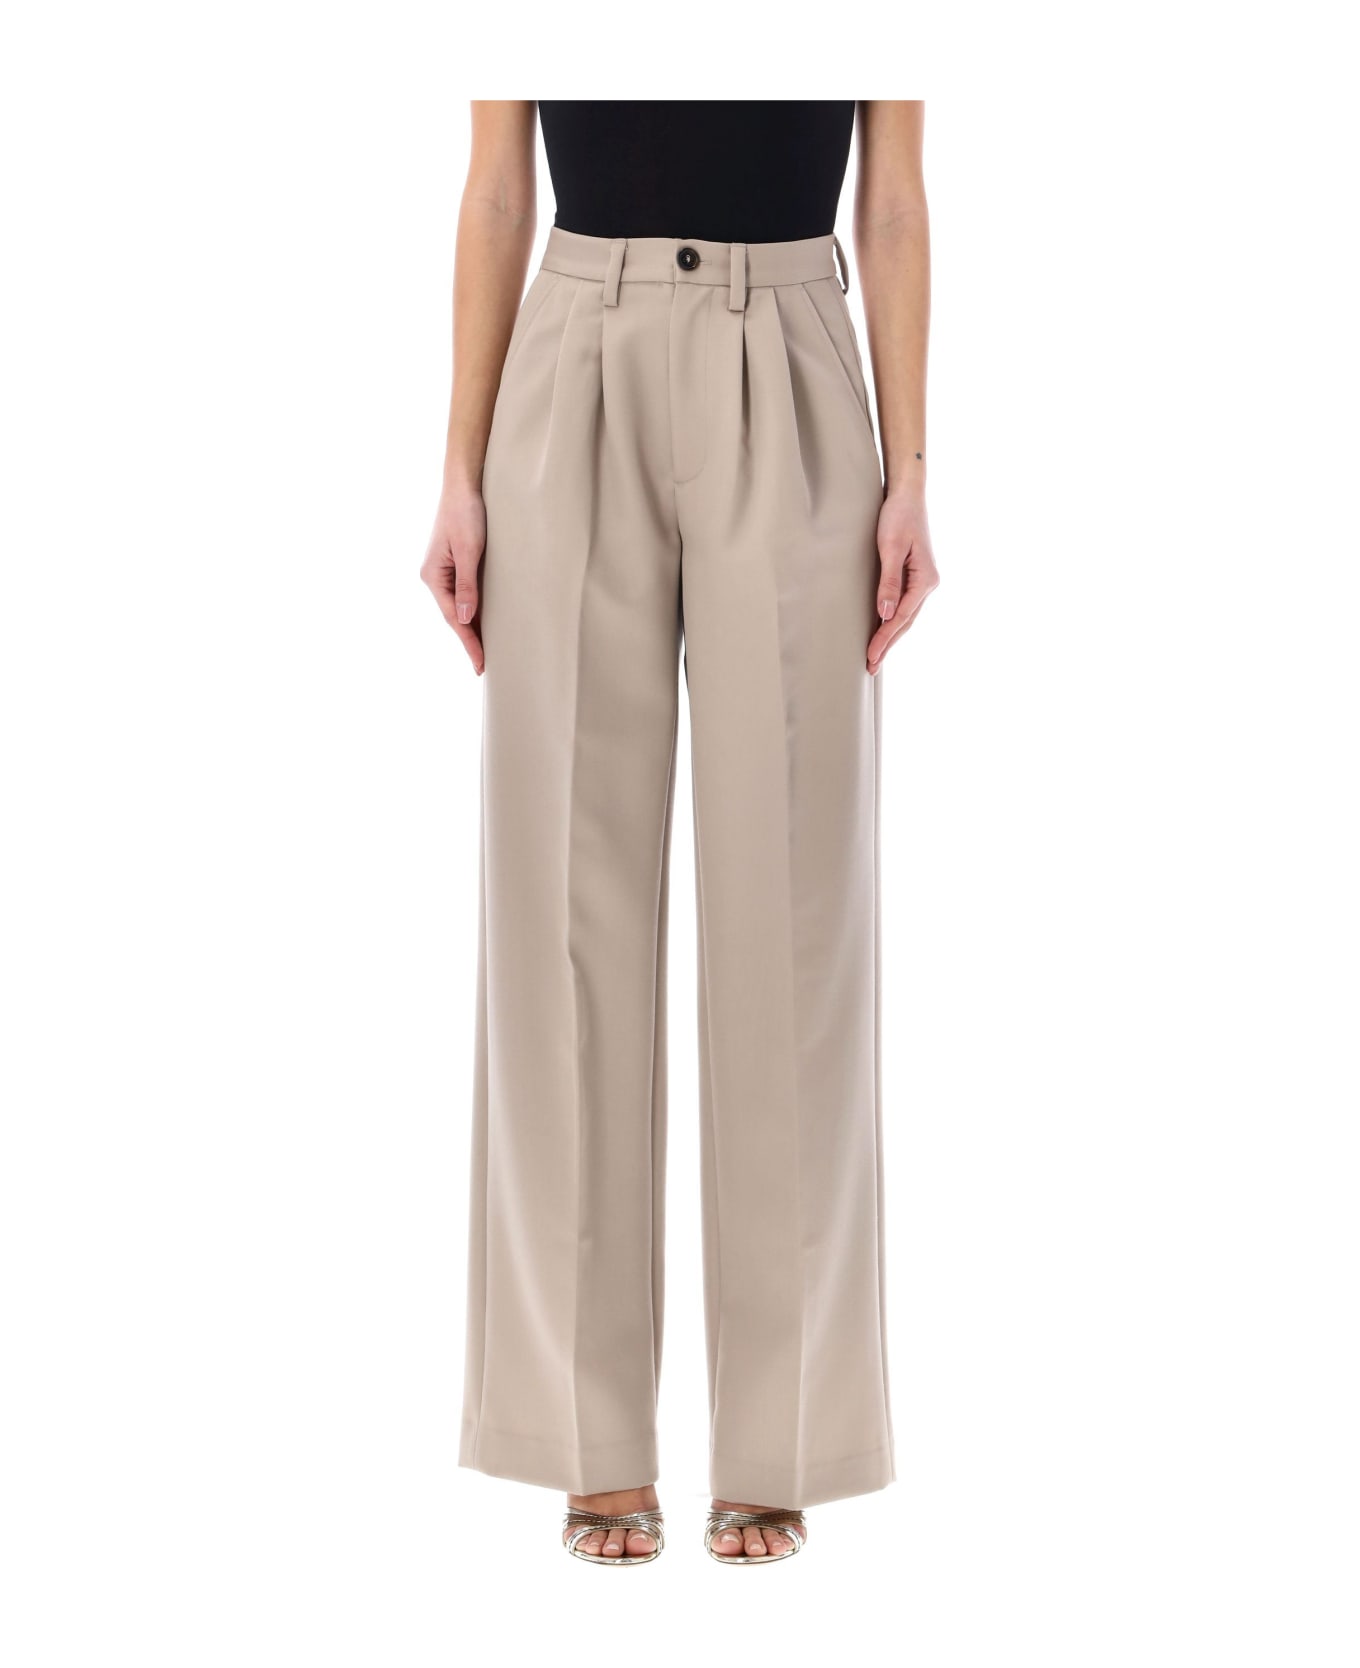 Anine Bing Carrie Pant - NEUTRALS